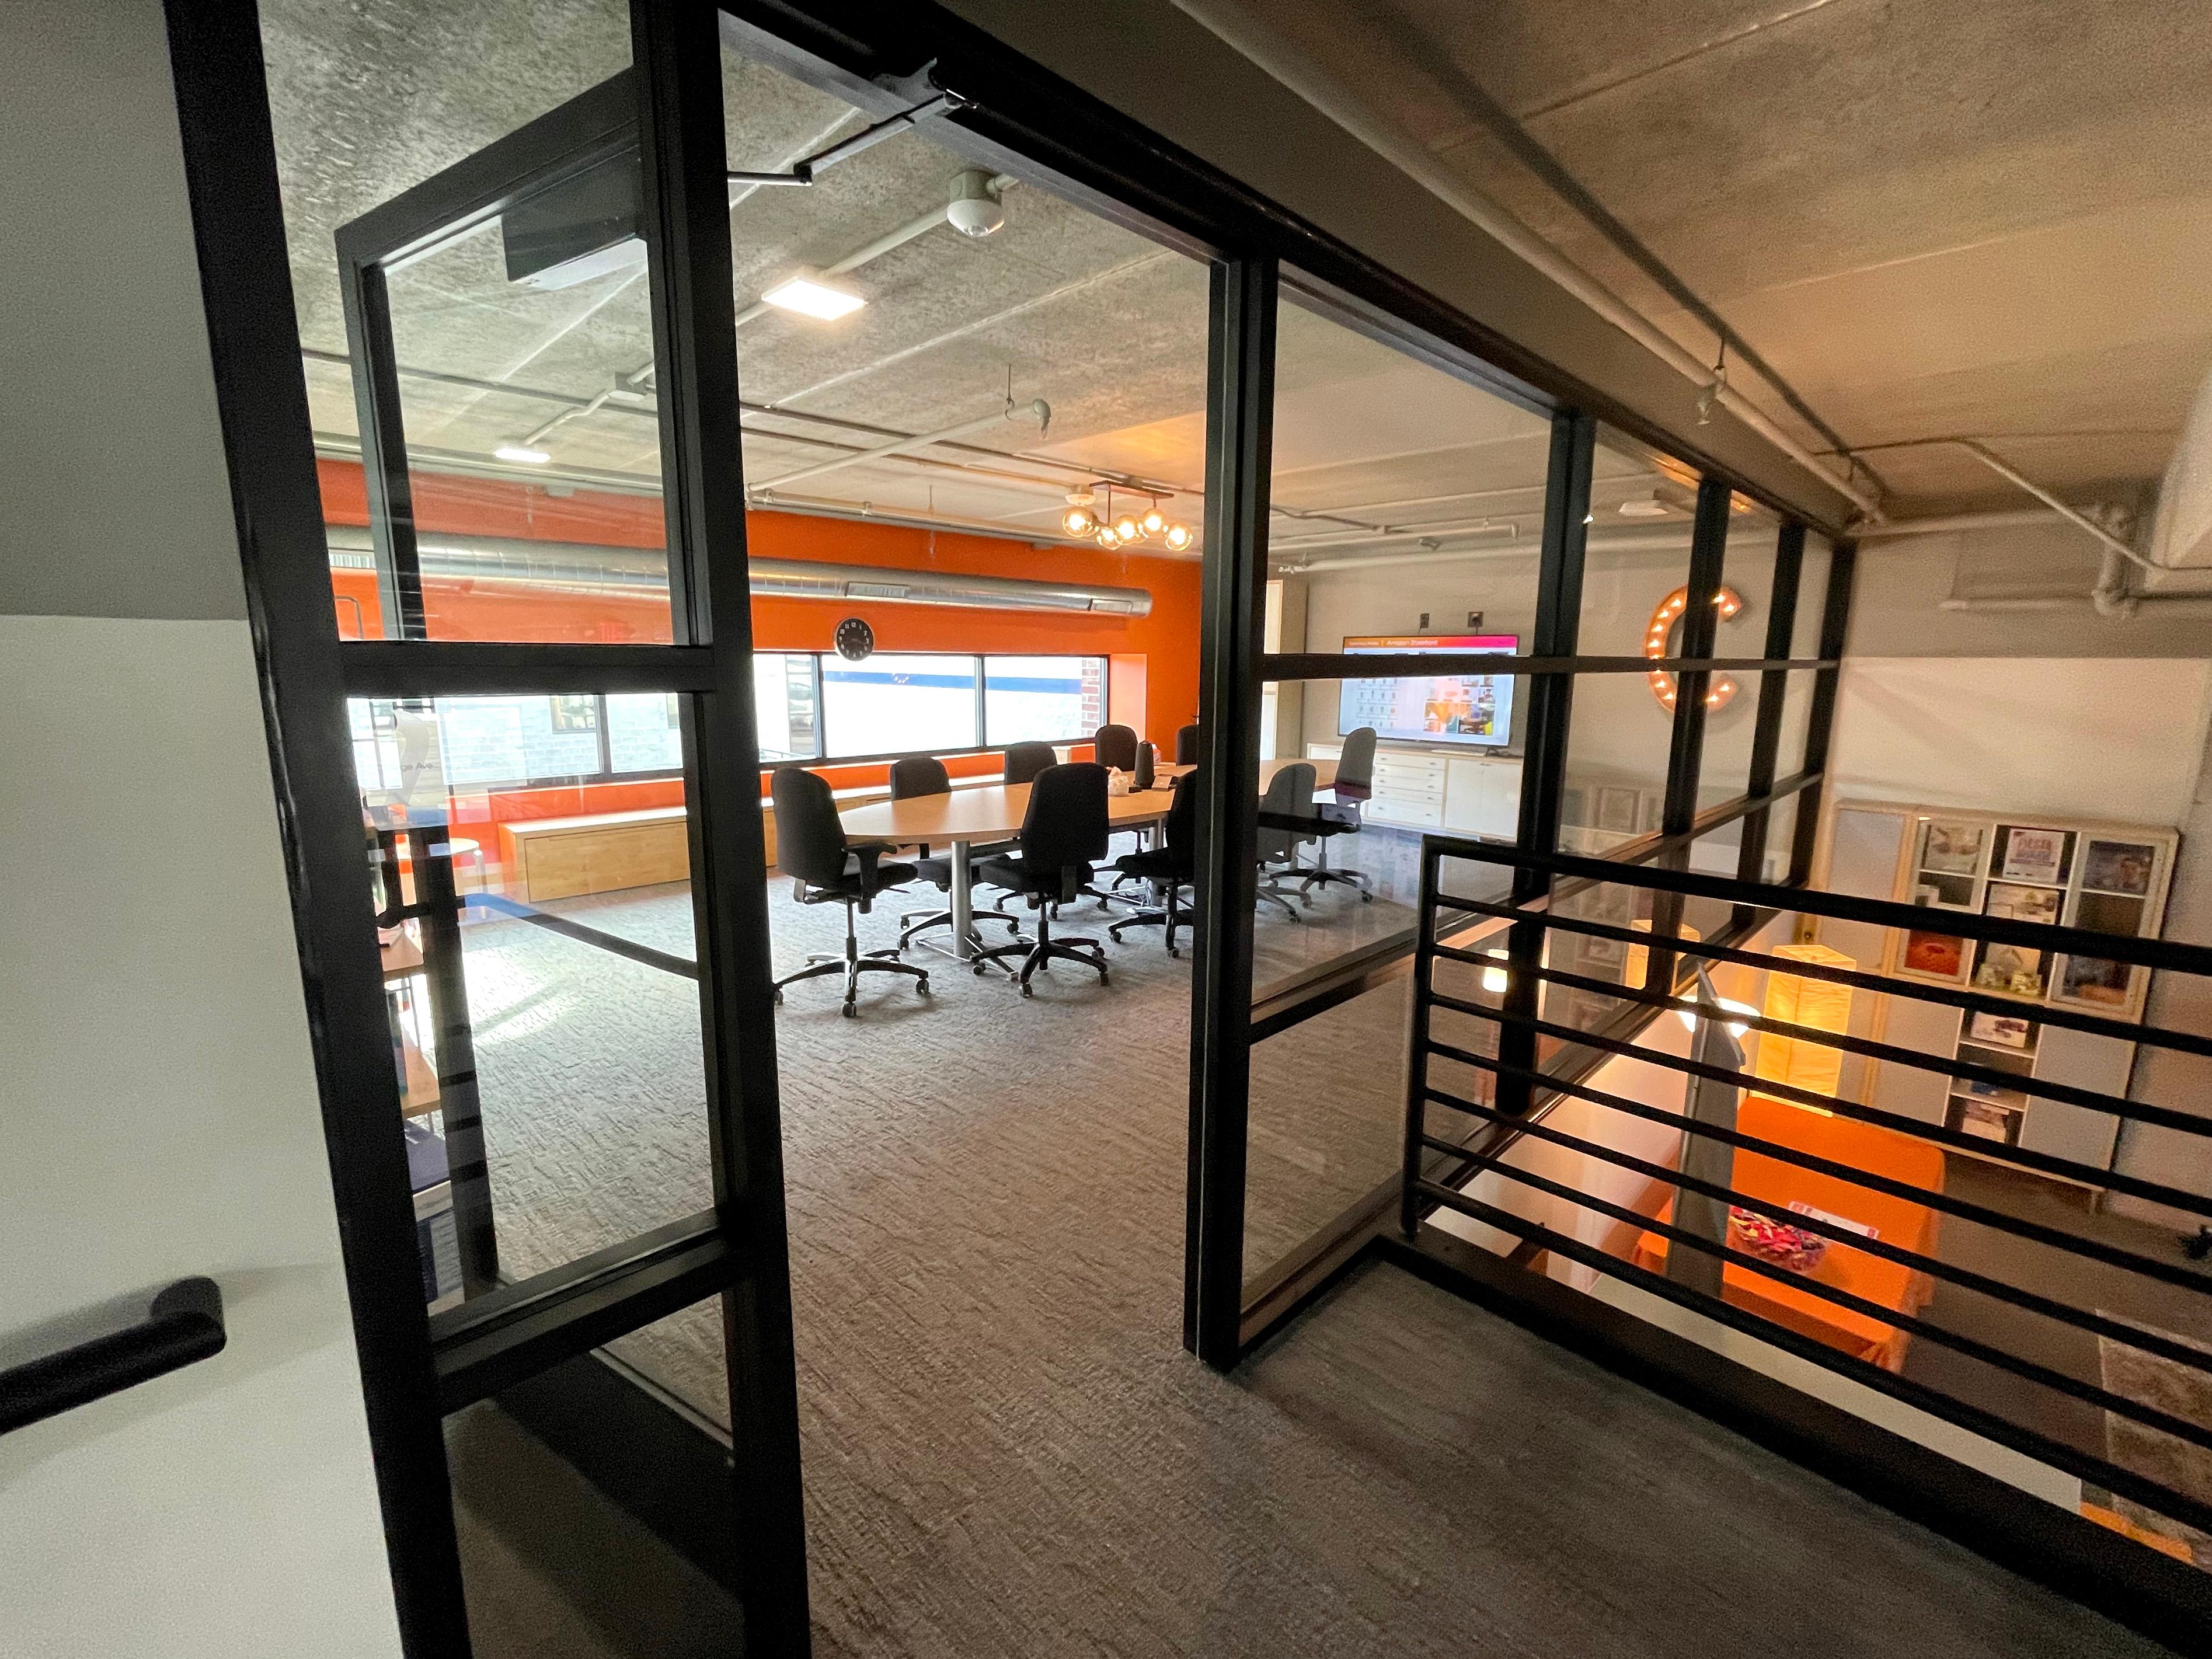 Looking inside the Coalesce Marketing and Design conference room